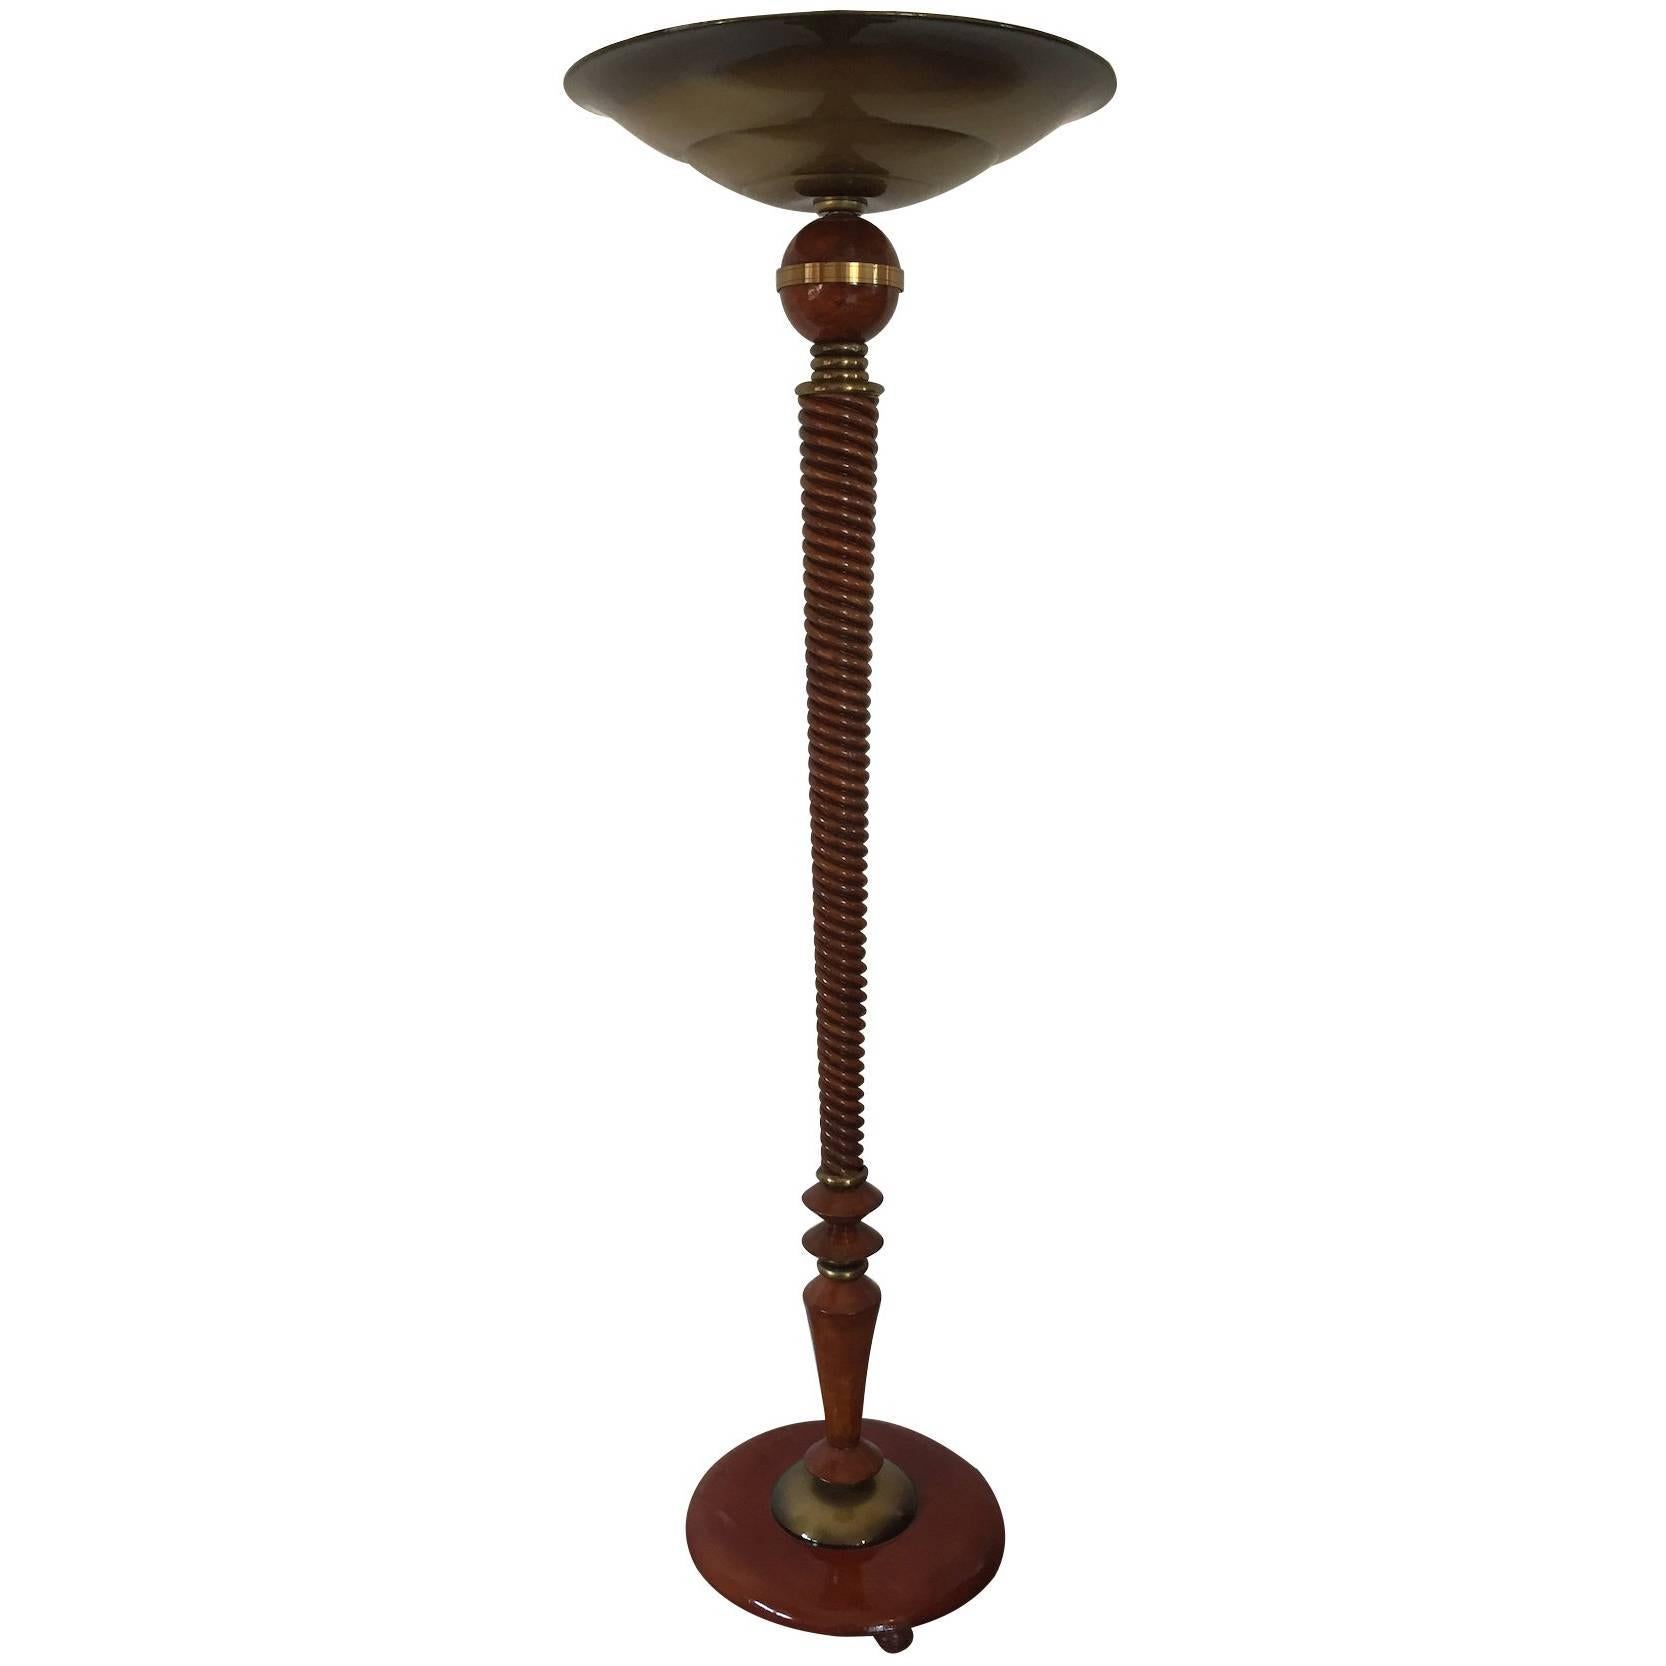 Unique French Art Deco floor lamp. Beautiful carved wood shaft design with superb brass decorations and circular base. The conditions of the period are very good with its original brass patina, fully functionally and ready to use. Recommended